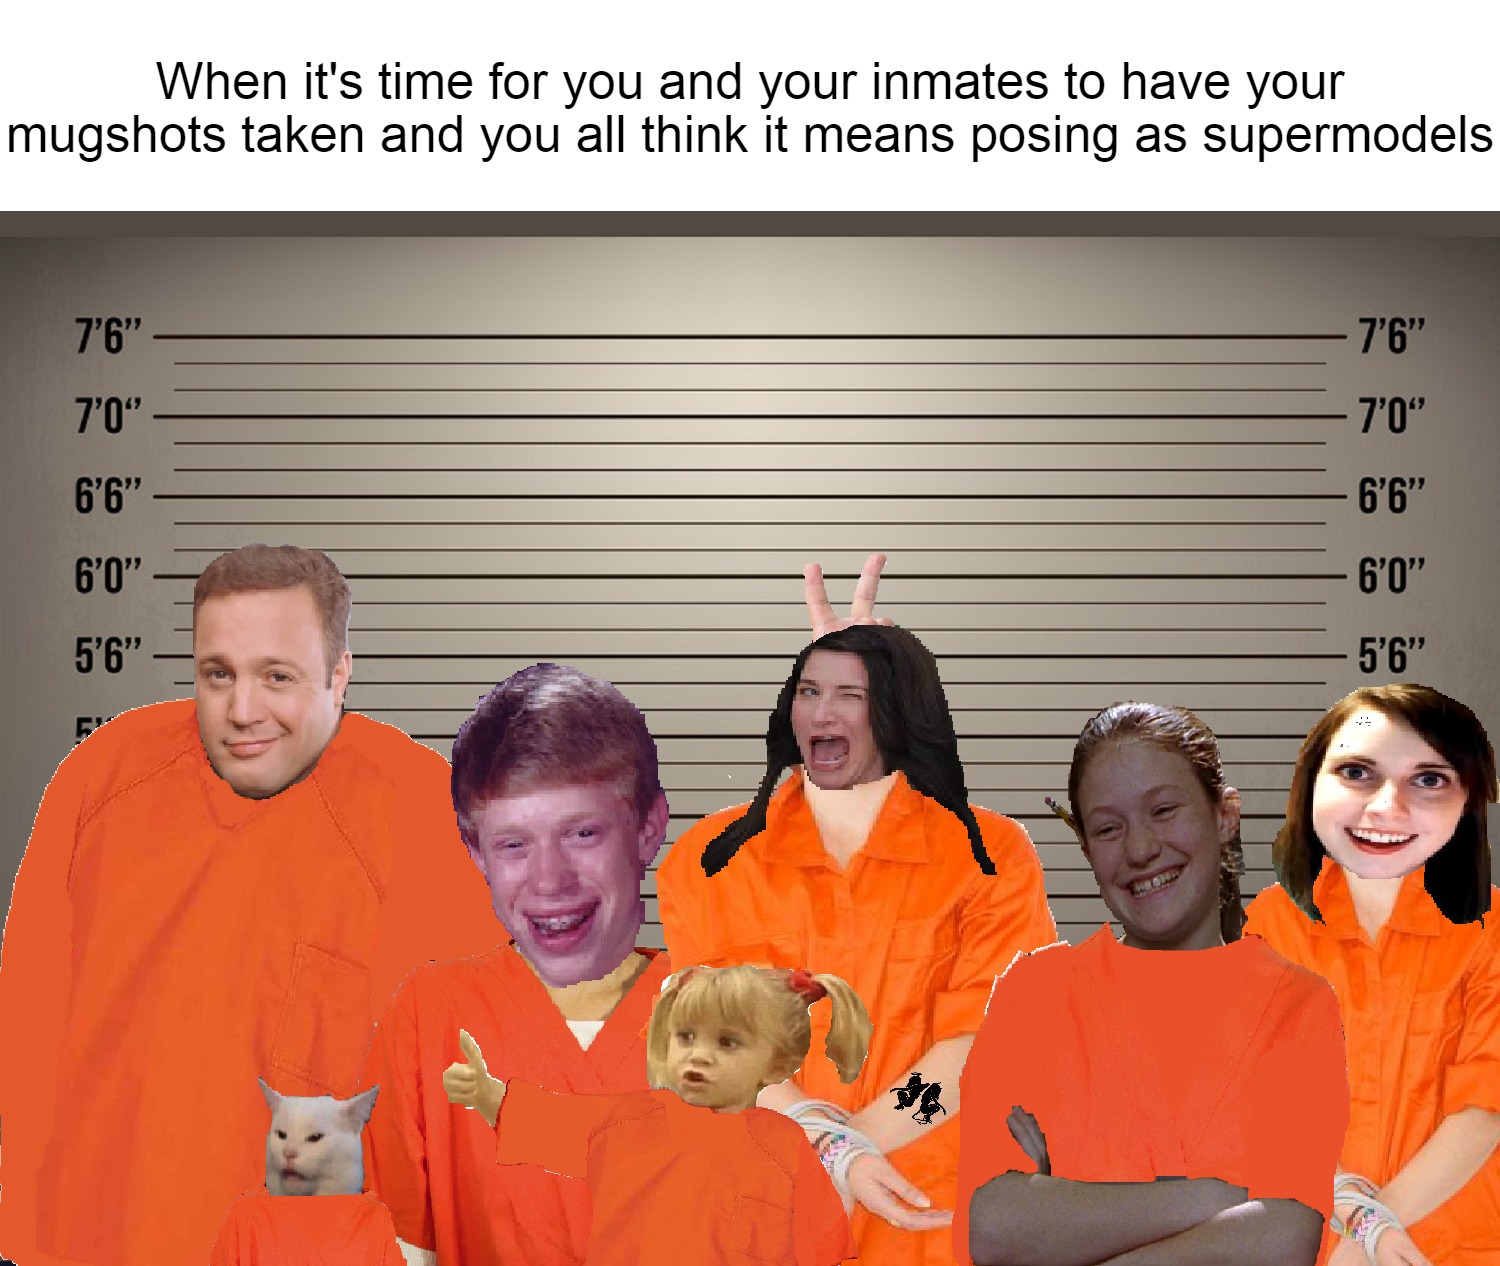 When it's time for you and your inmates to have your mugshots taken and you all think it means posing as supermodels | image tagged in meme,memes,funny,dank memes,prison | made w/ Imgflip meme maker